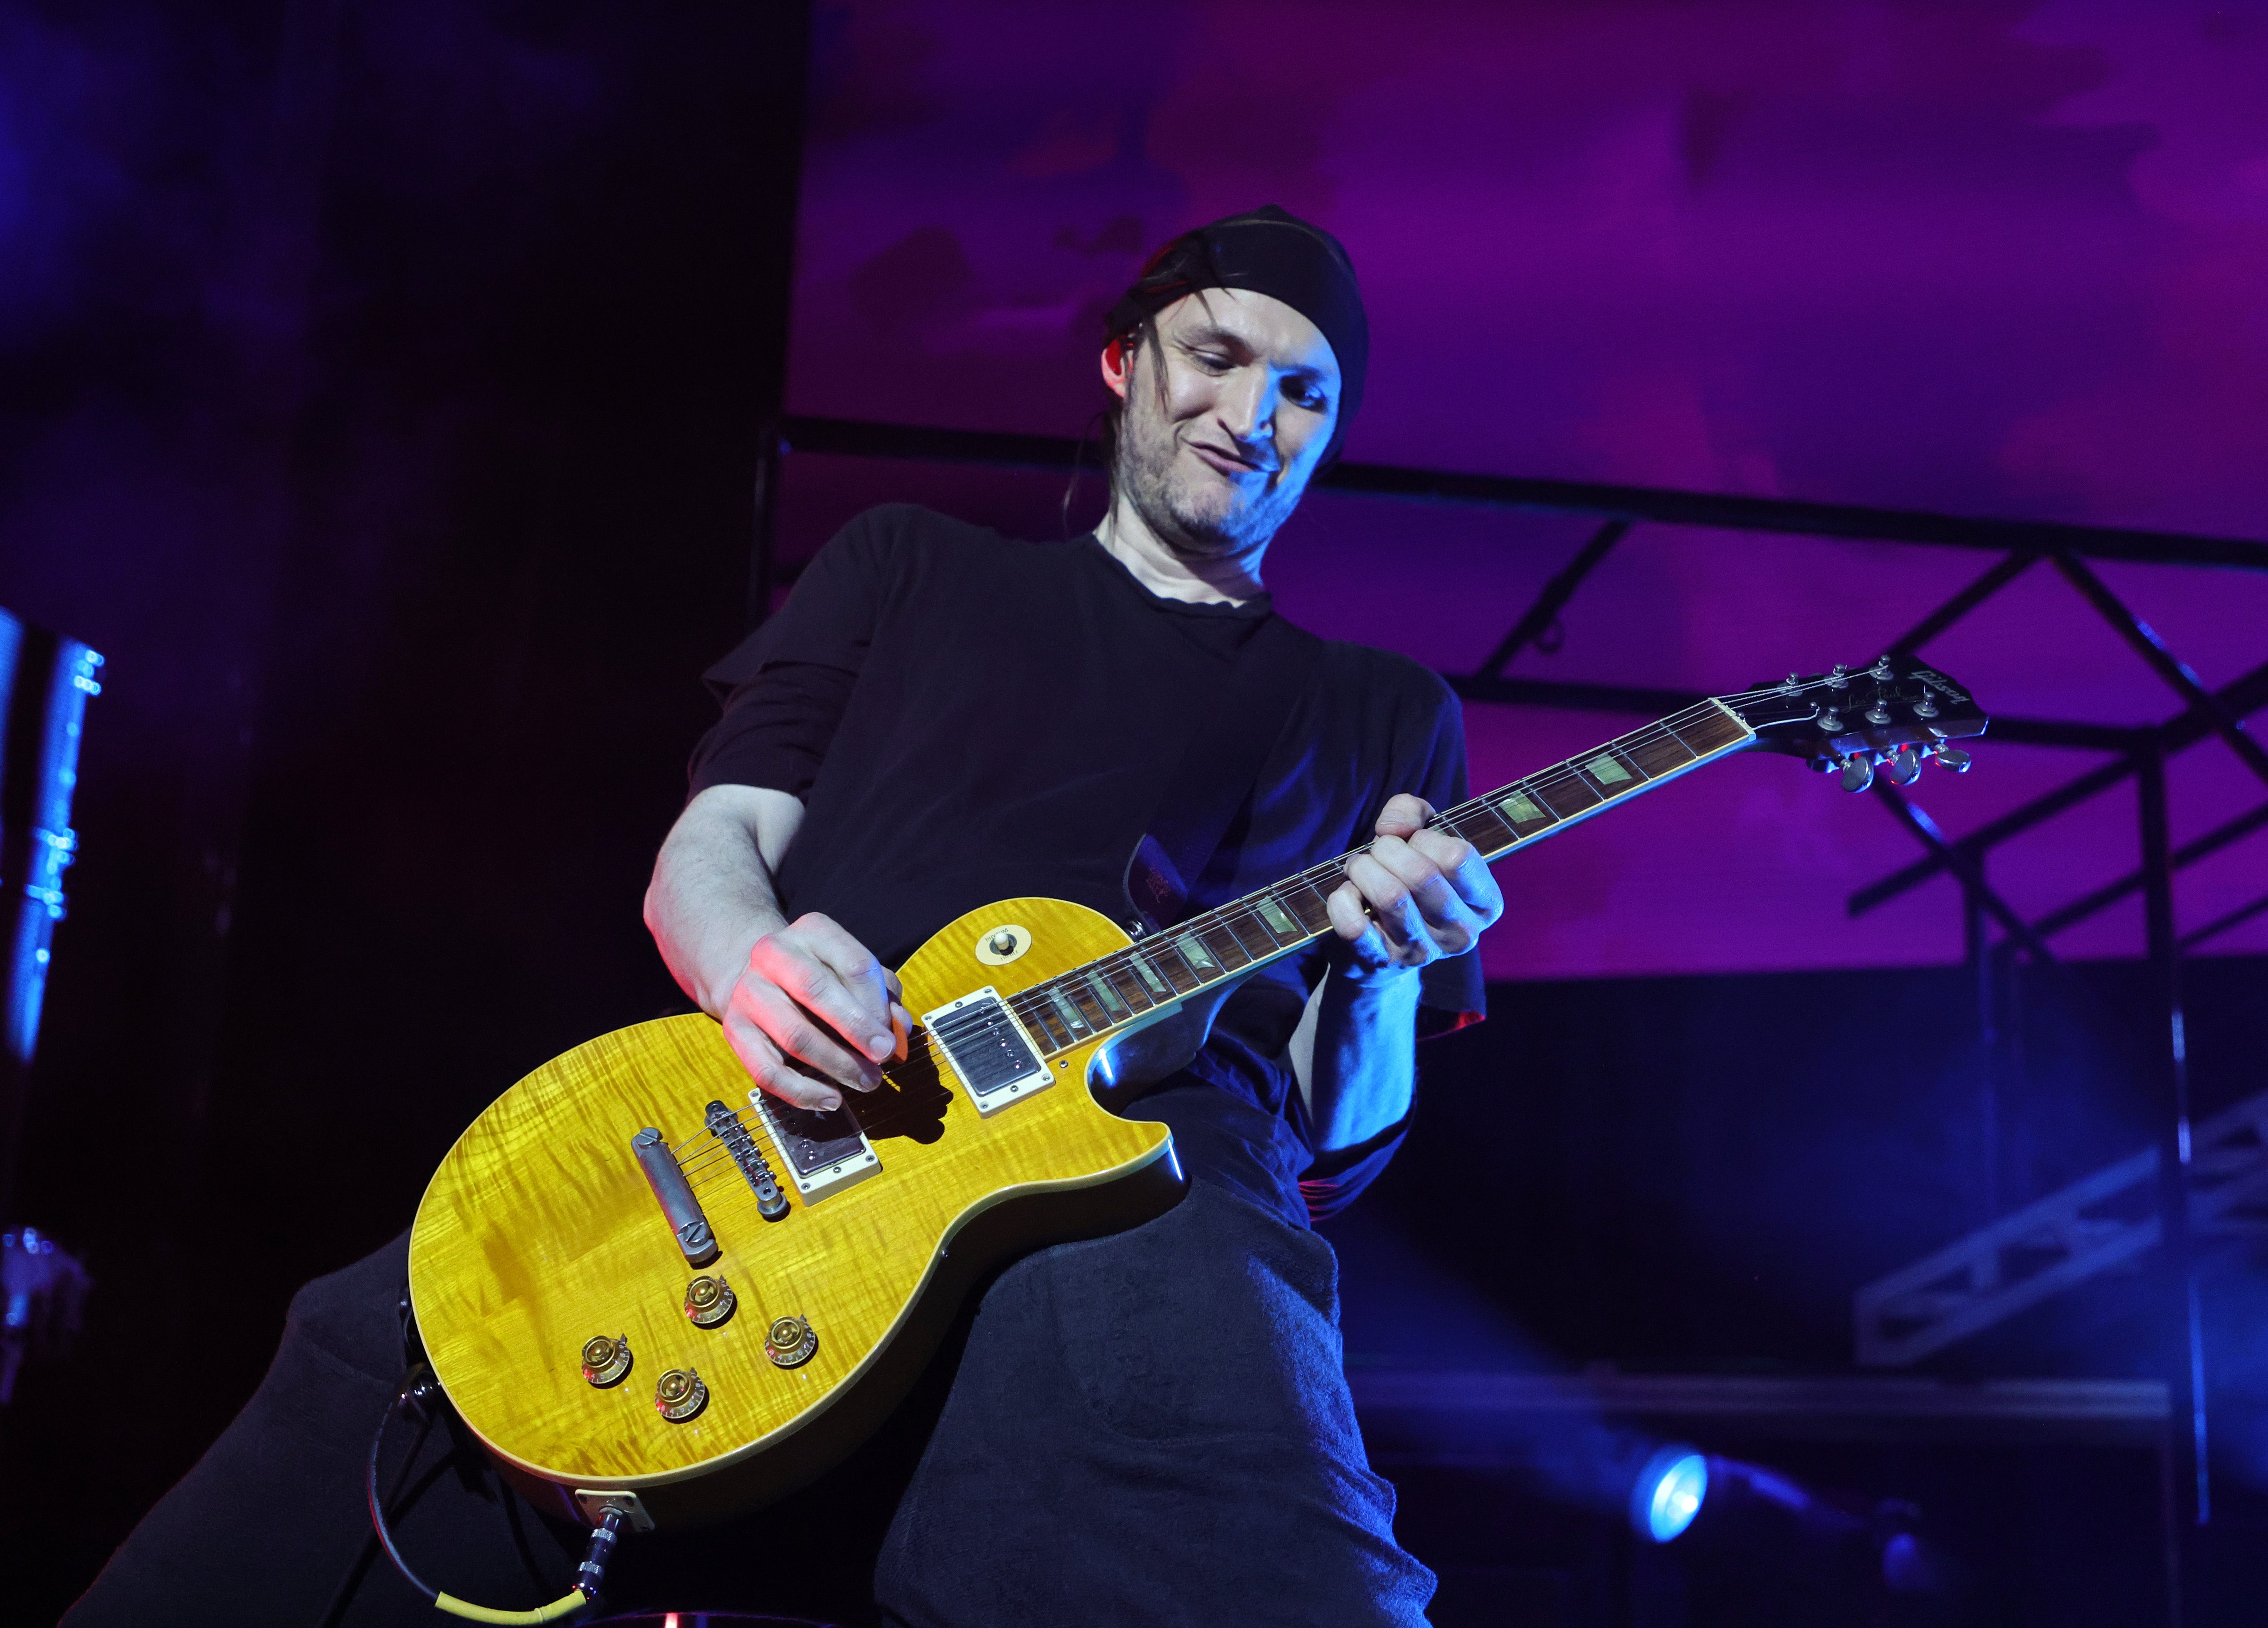 Josh Klinghoffer was a guitarist for the Red Hot Chili Peppers from 2009 to 2019